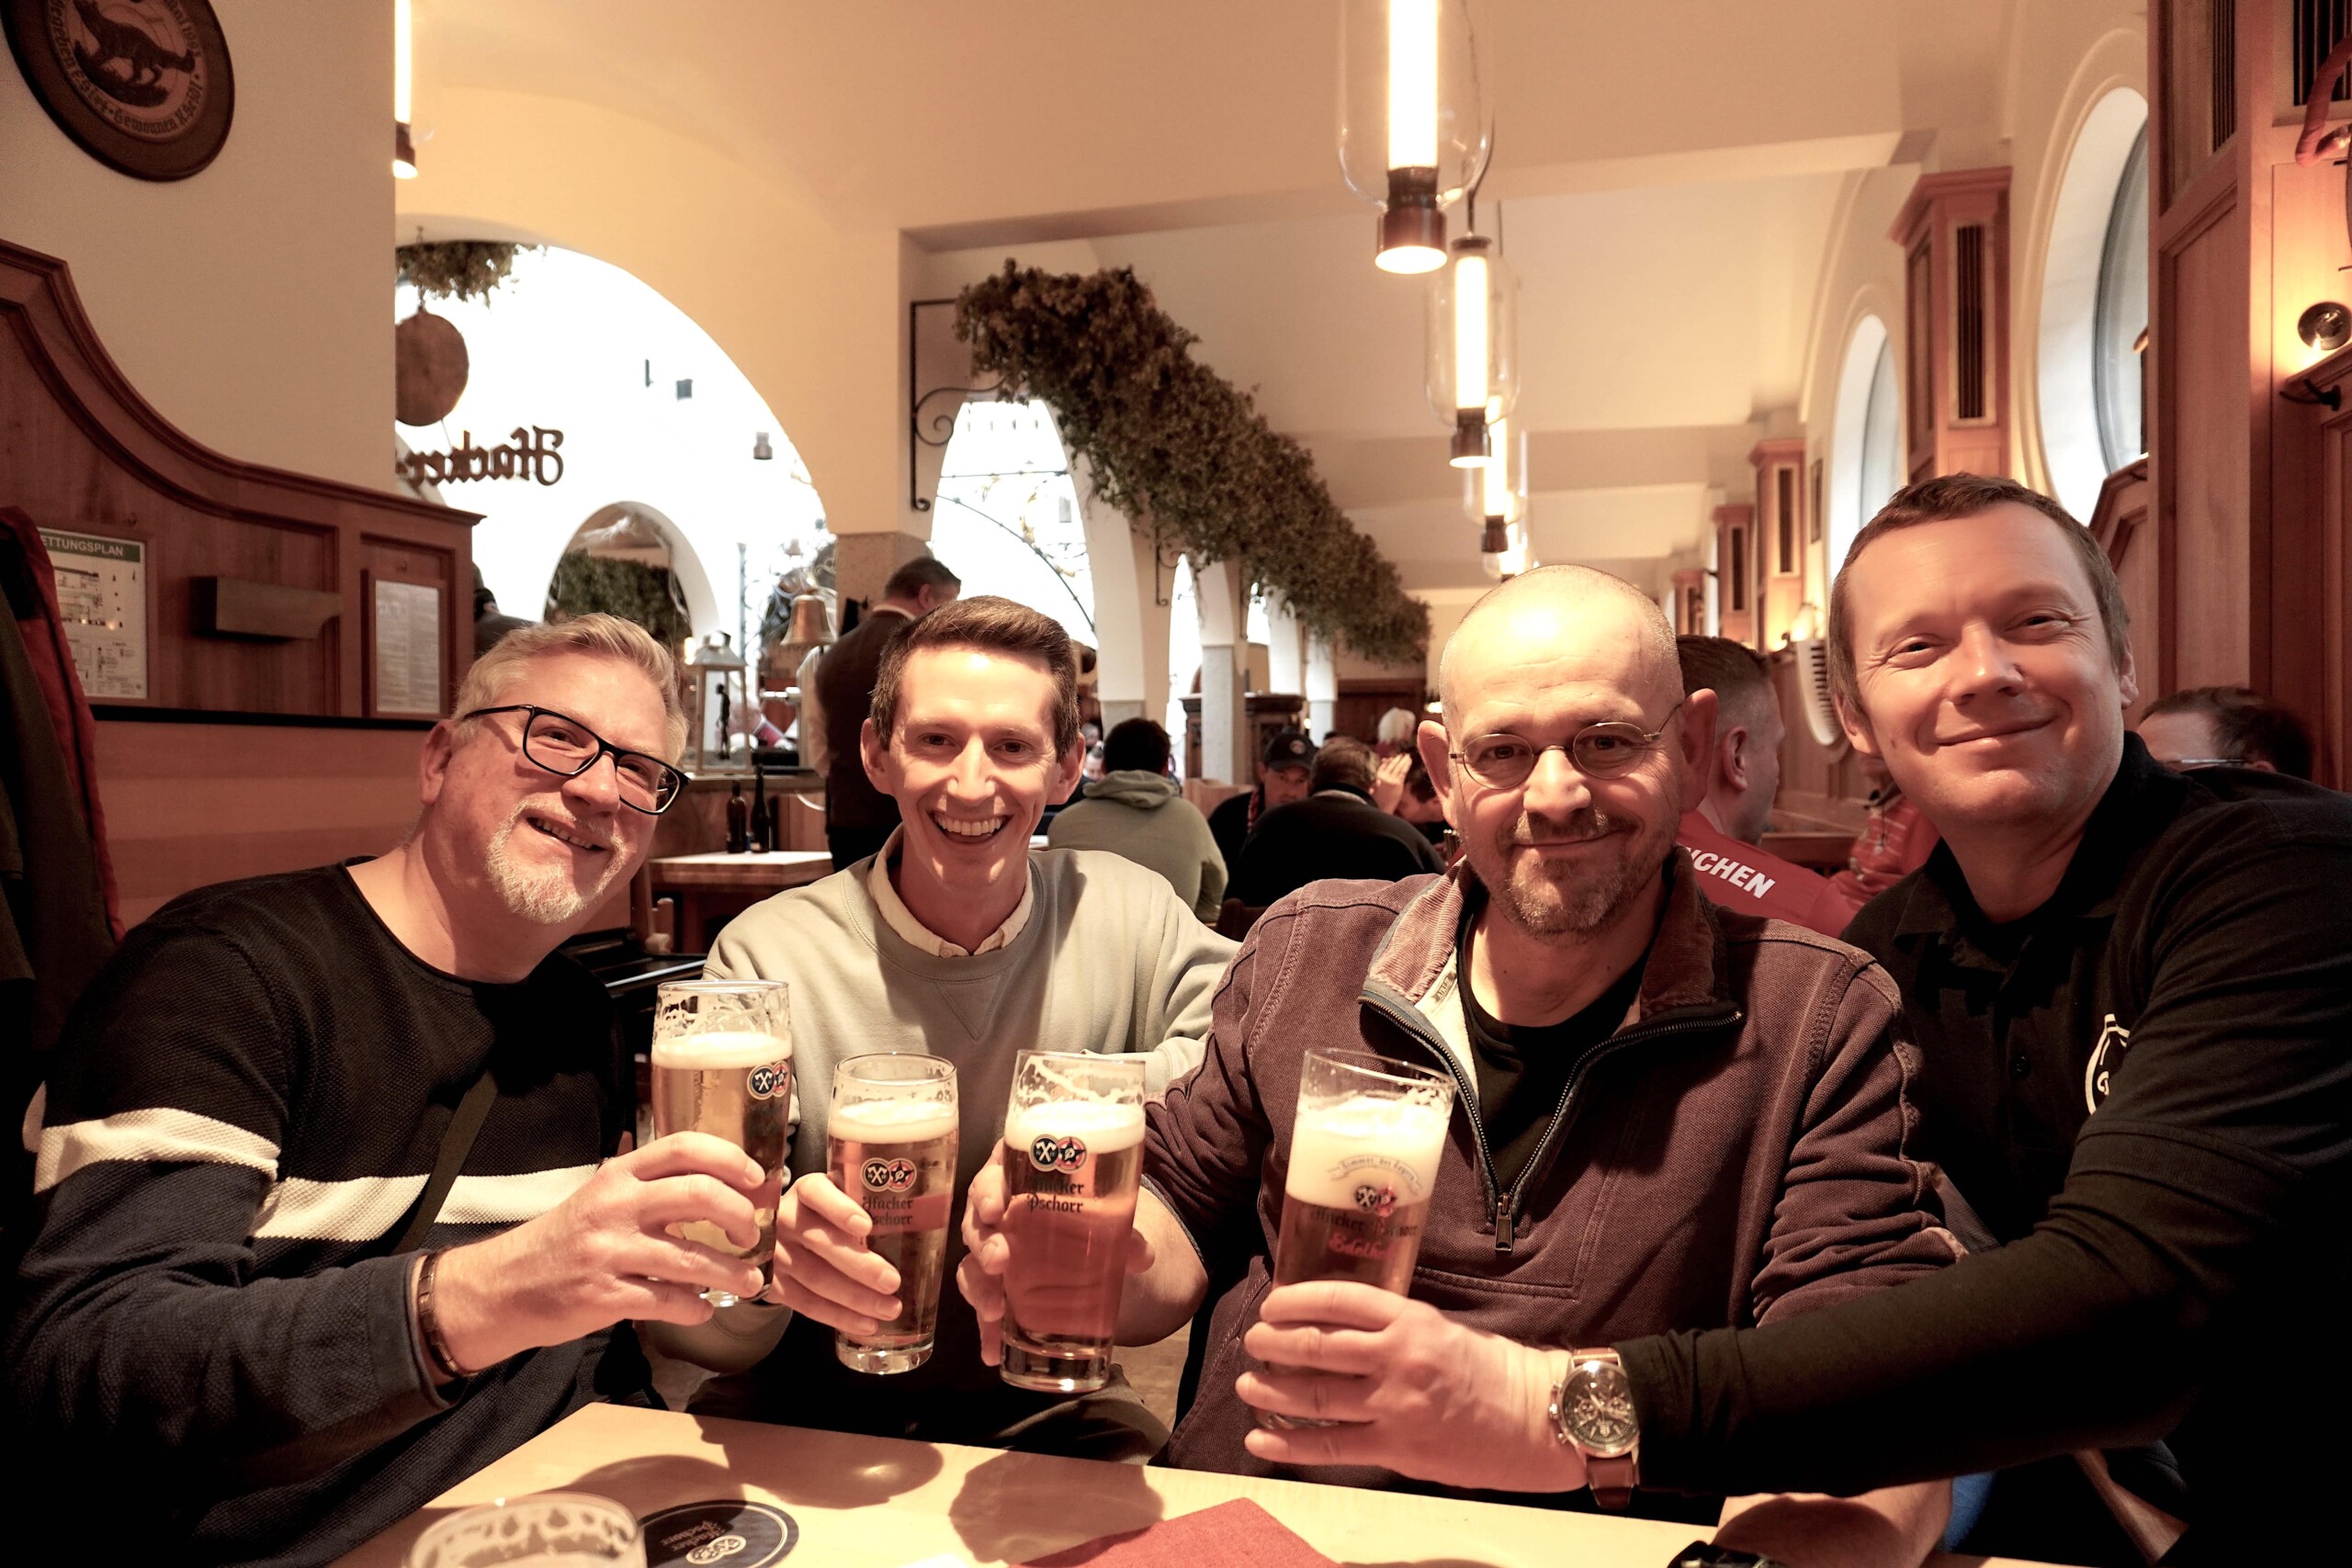 Four men cheers at the Hacker-Pschorr House in Munich